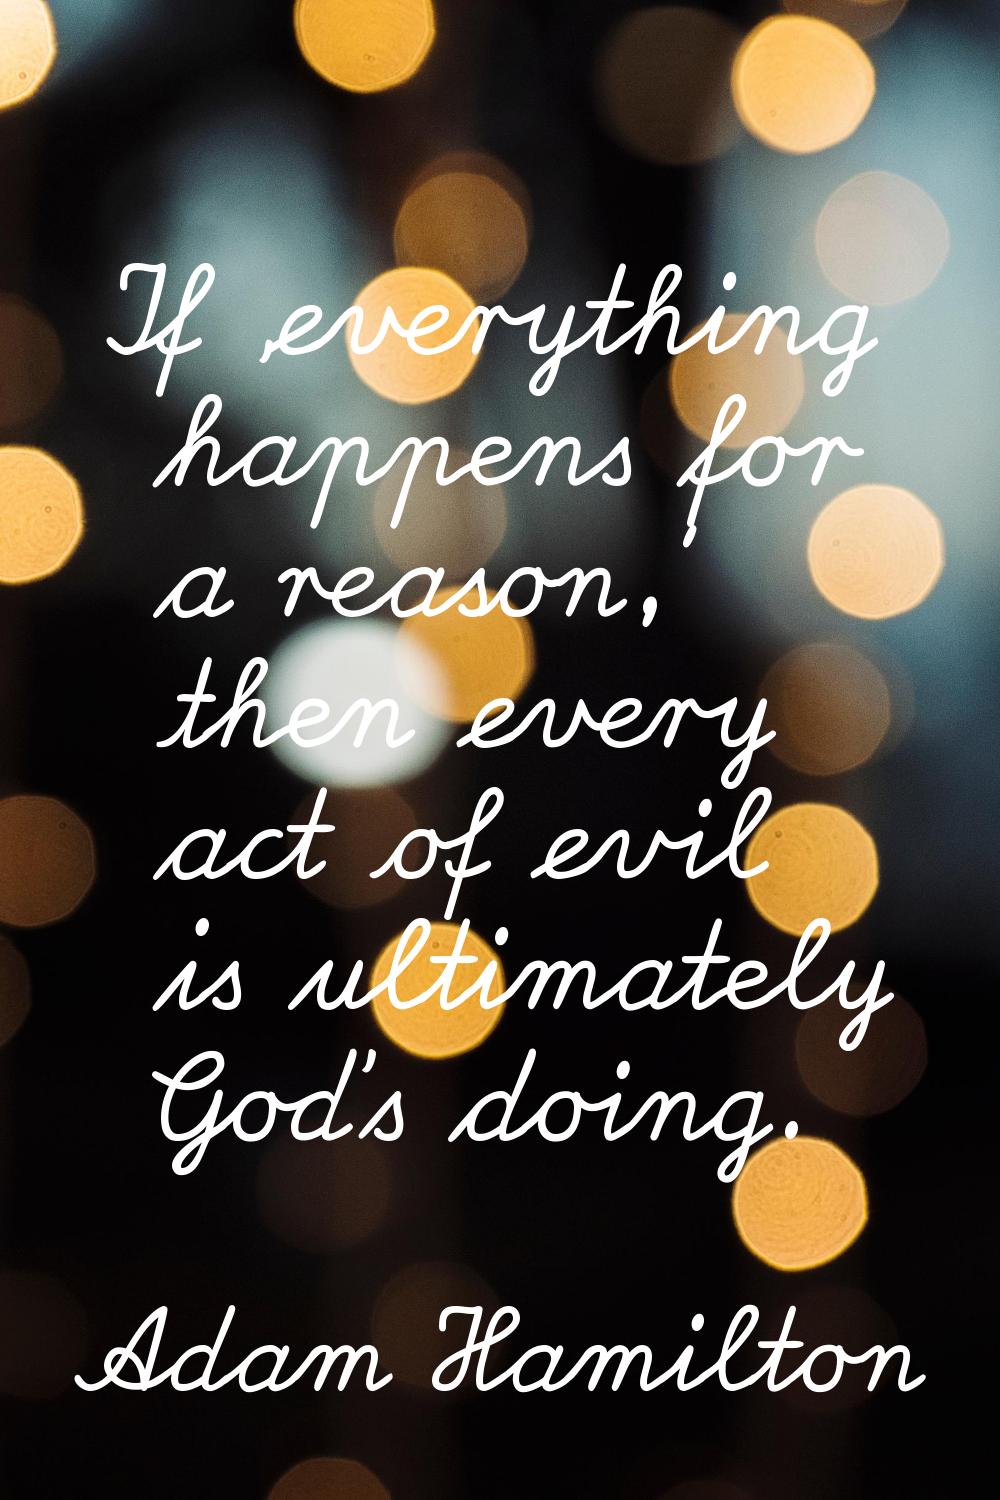 If 'everything happens for a reason,' then every act of evil is ultimately God's doing.